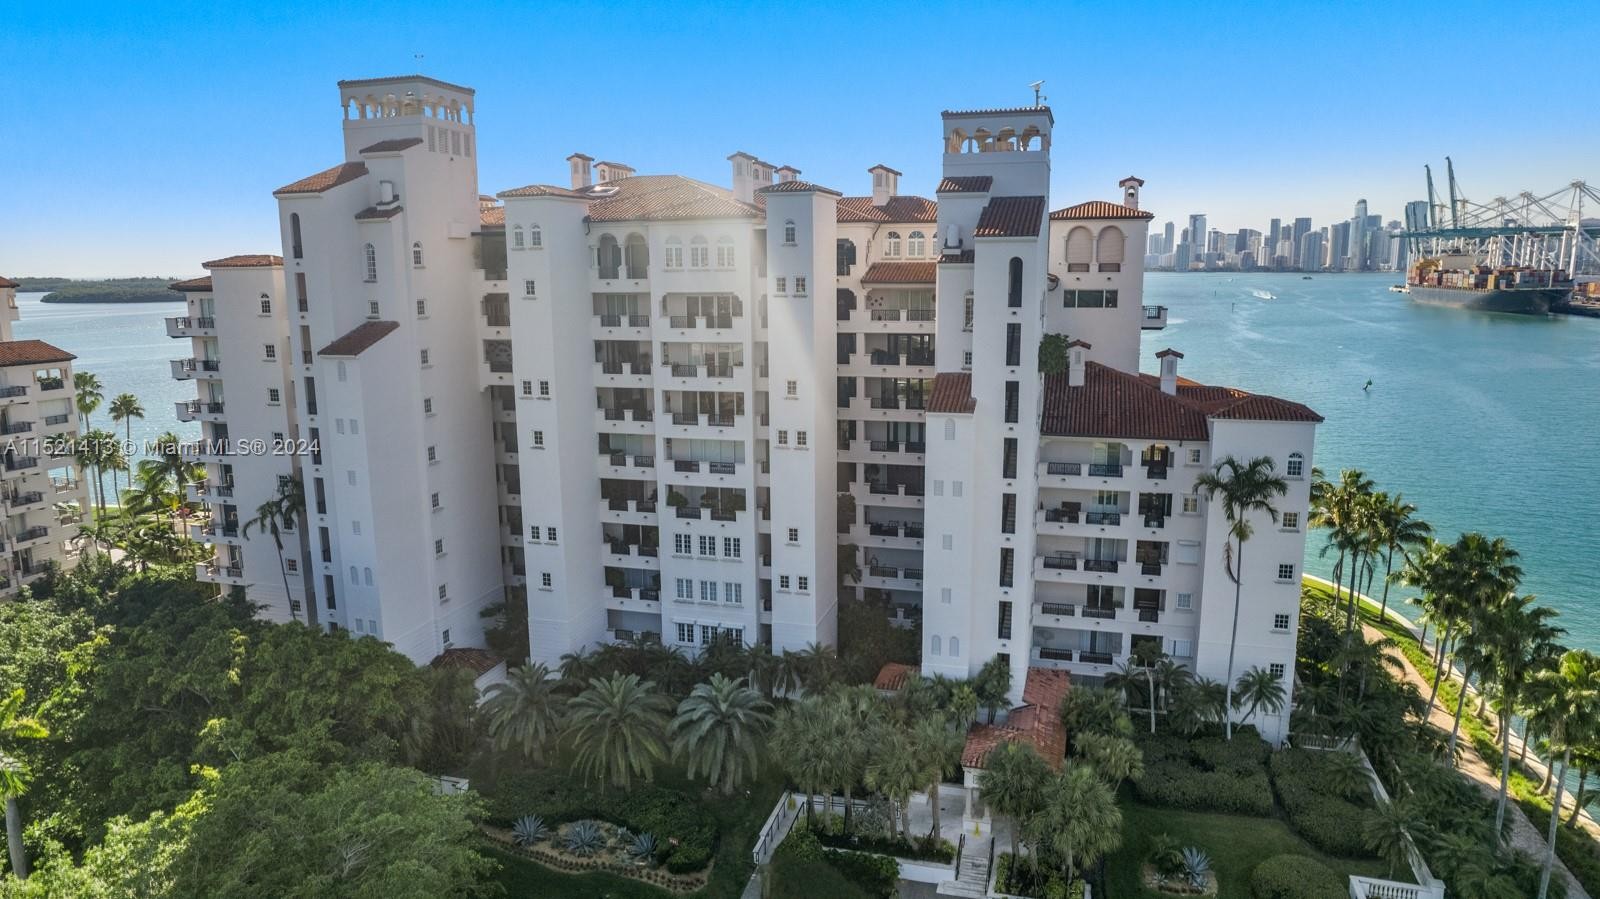 44. Fisher Island Dr